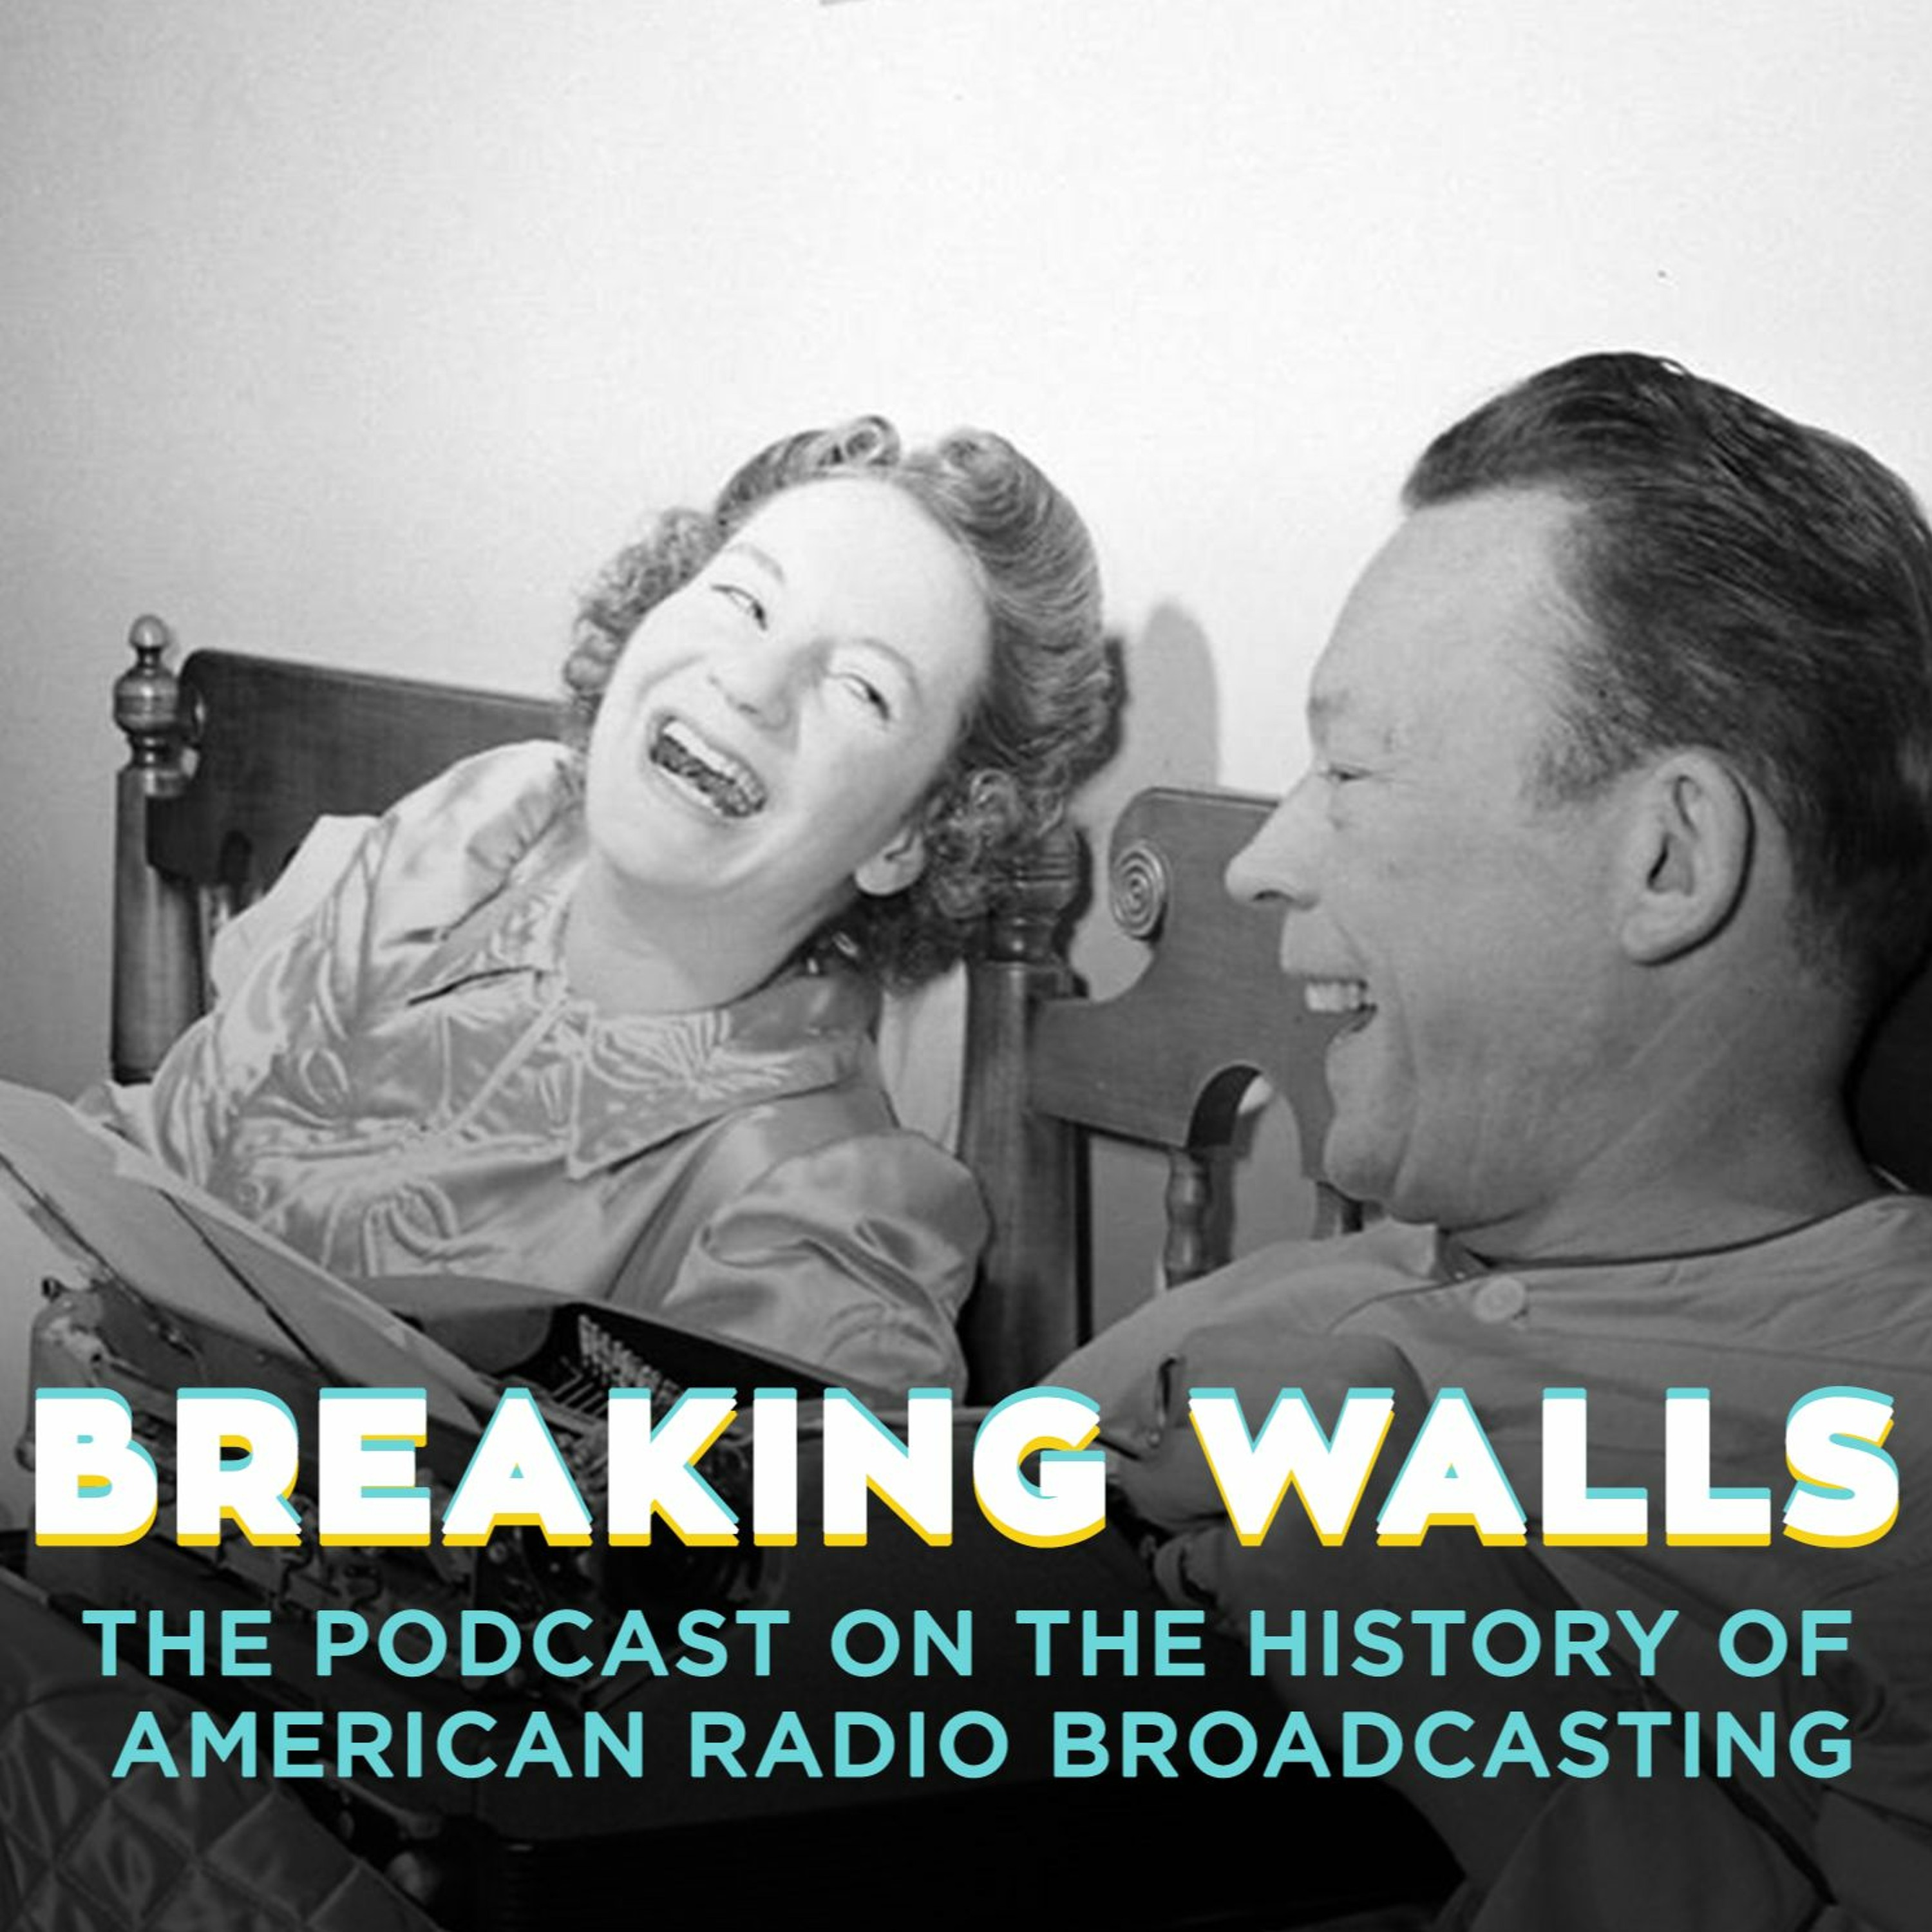 BW - EP150—010: Easter Sunday 1944—Fred Allen Solves A Mystery & Takes Time Off For Hypertension